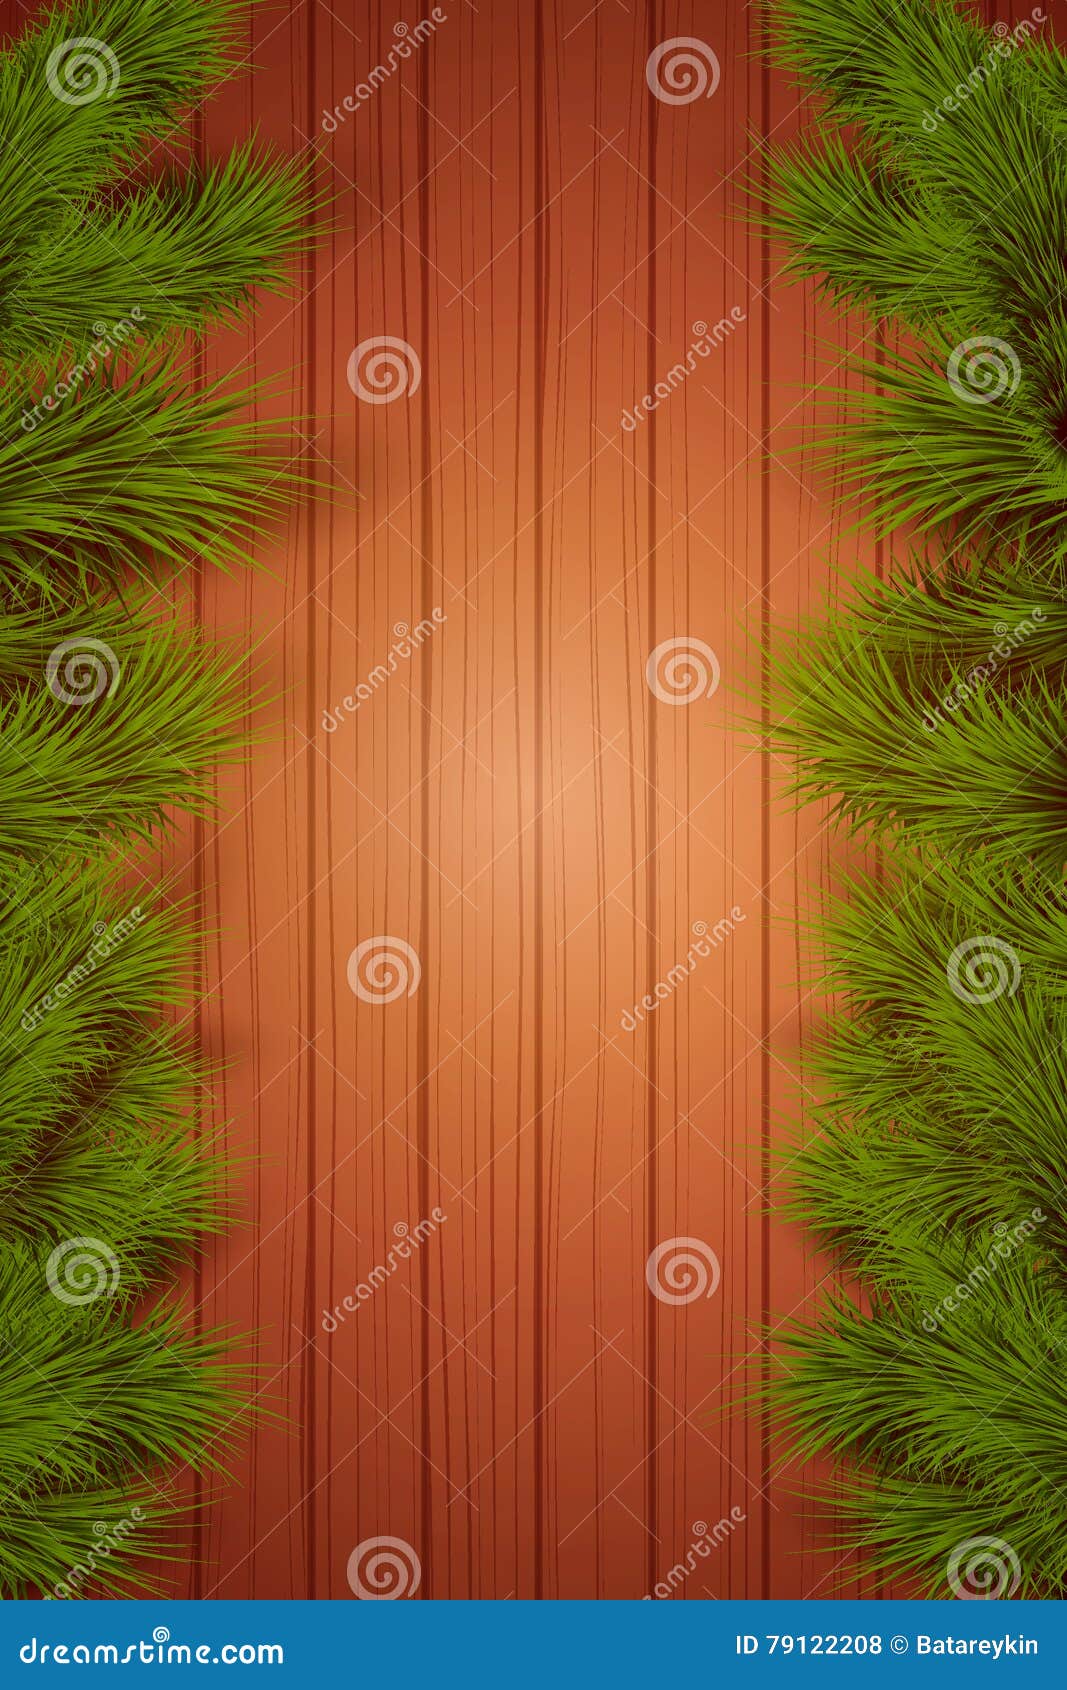 christmas wooden vertical background